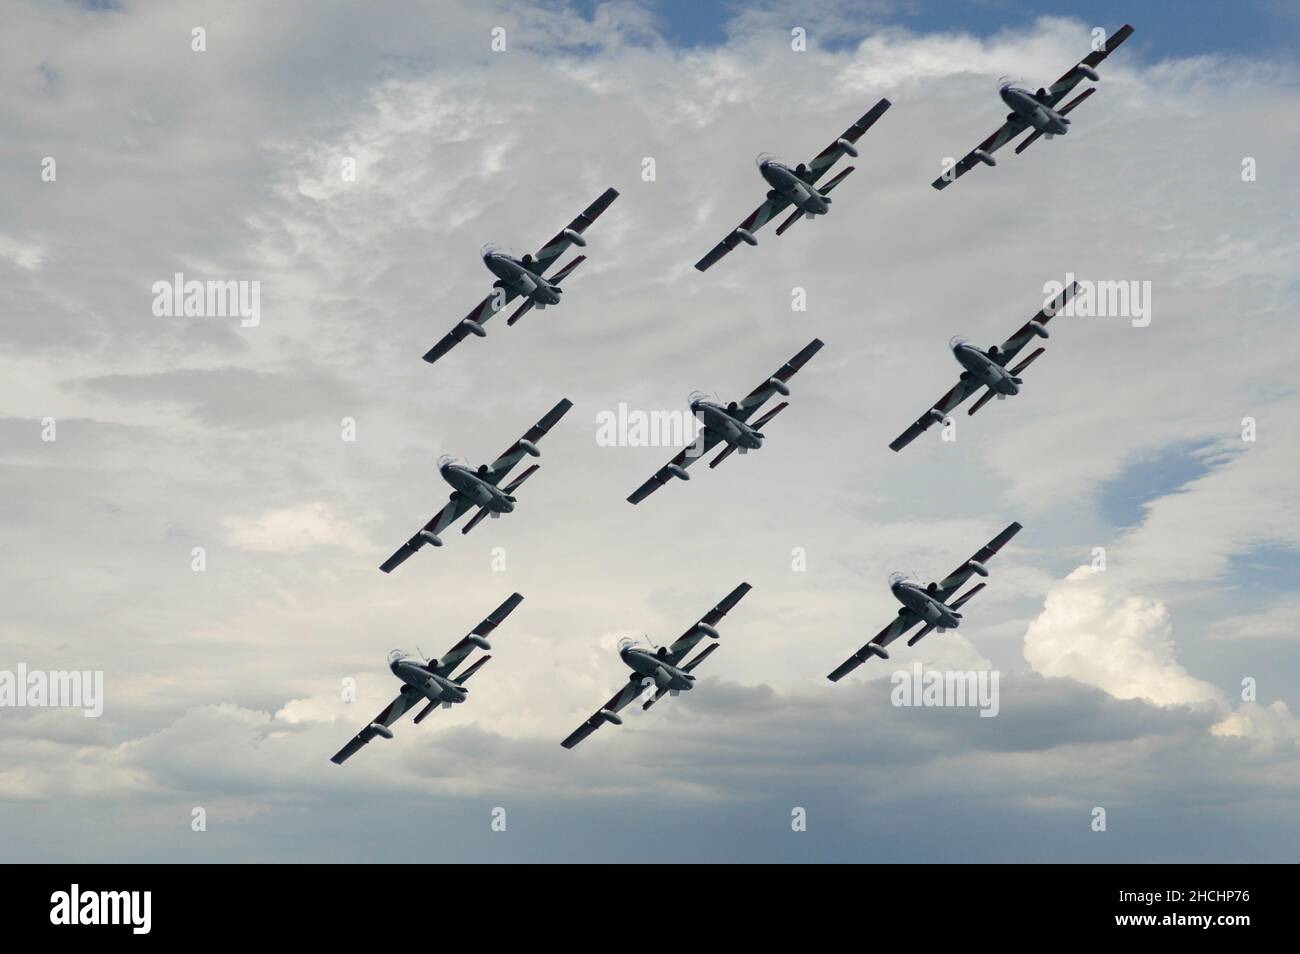 Aerobatic group of Frecce Tricolori, low angle aiew af the airplanes alying against cloudy sky Stock Photo